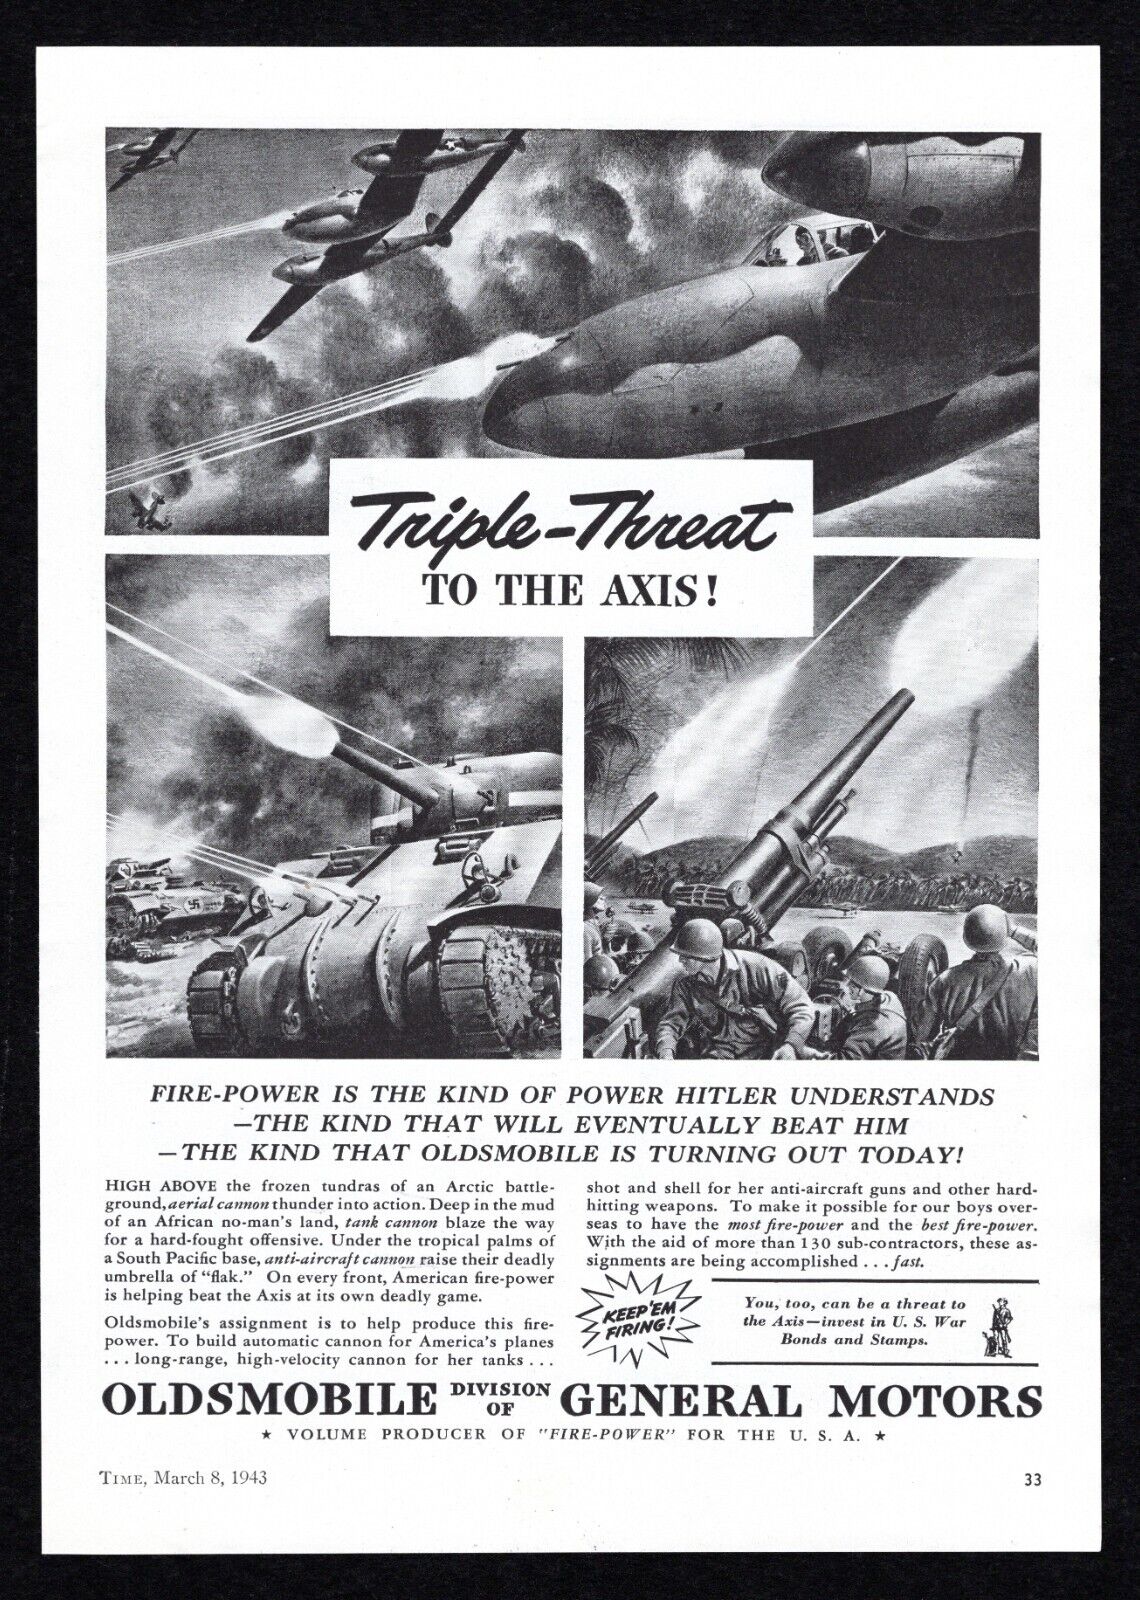 1943 Oldsmobile GM Triple Threat to Axis Fire Power Hitler Understands Print Ad